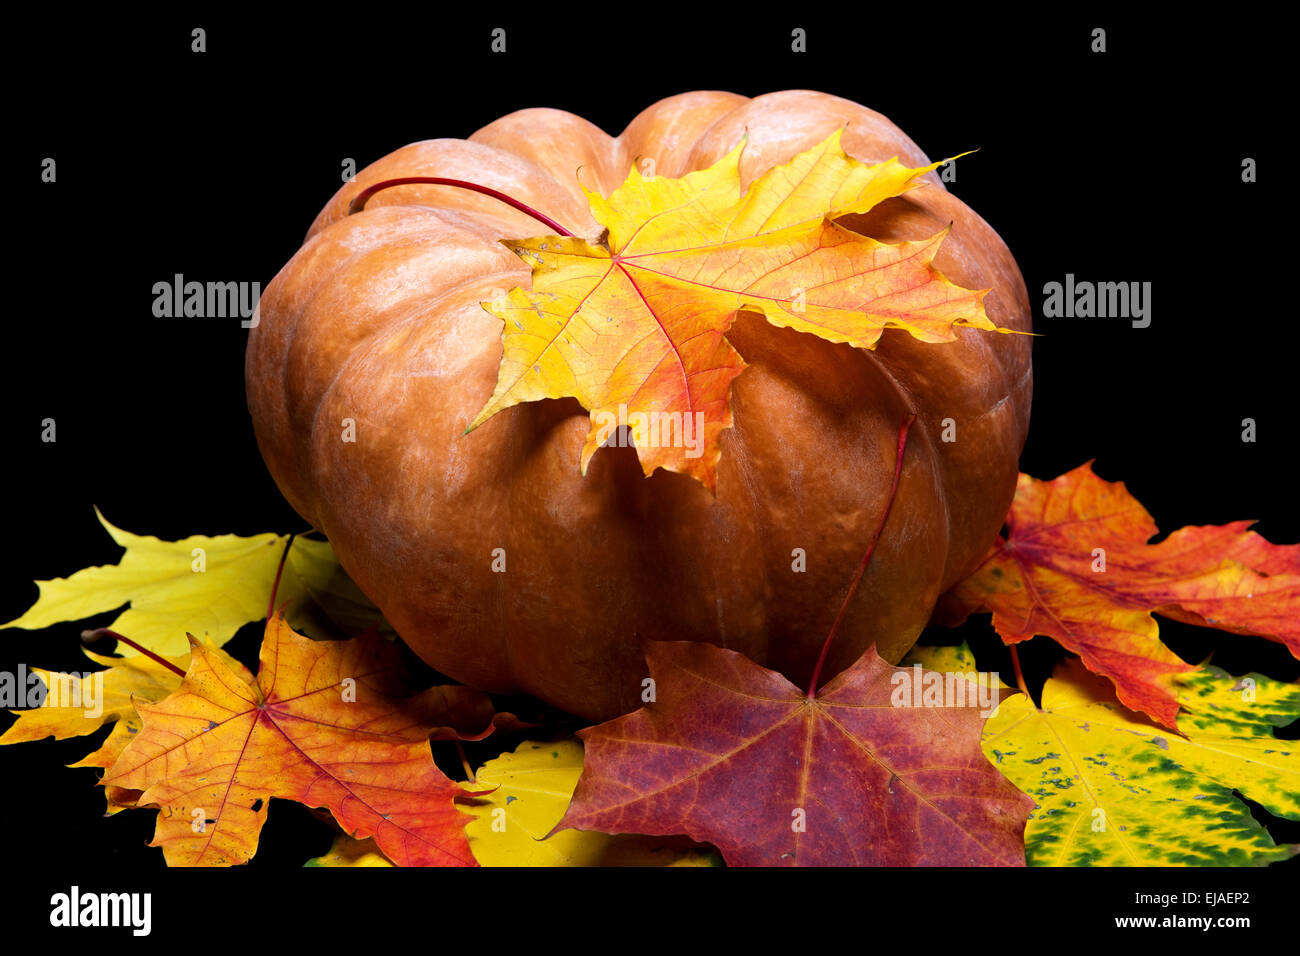 pumpkin and maple leaves on dark background Stock Photo